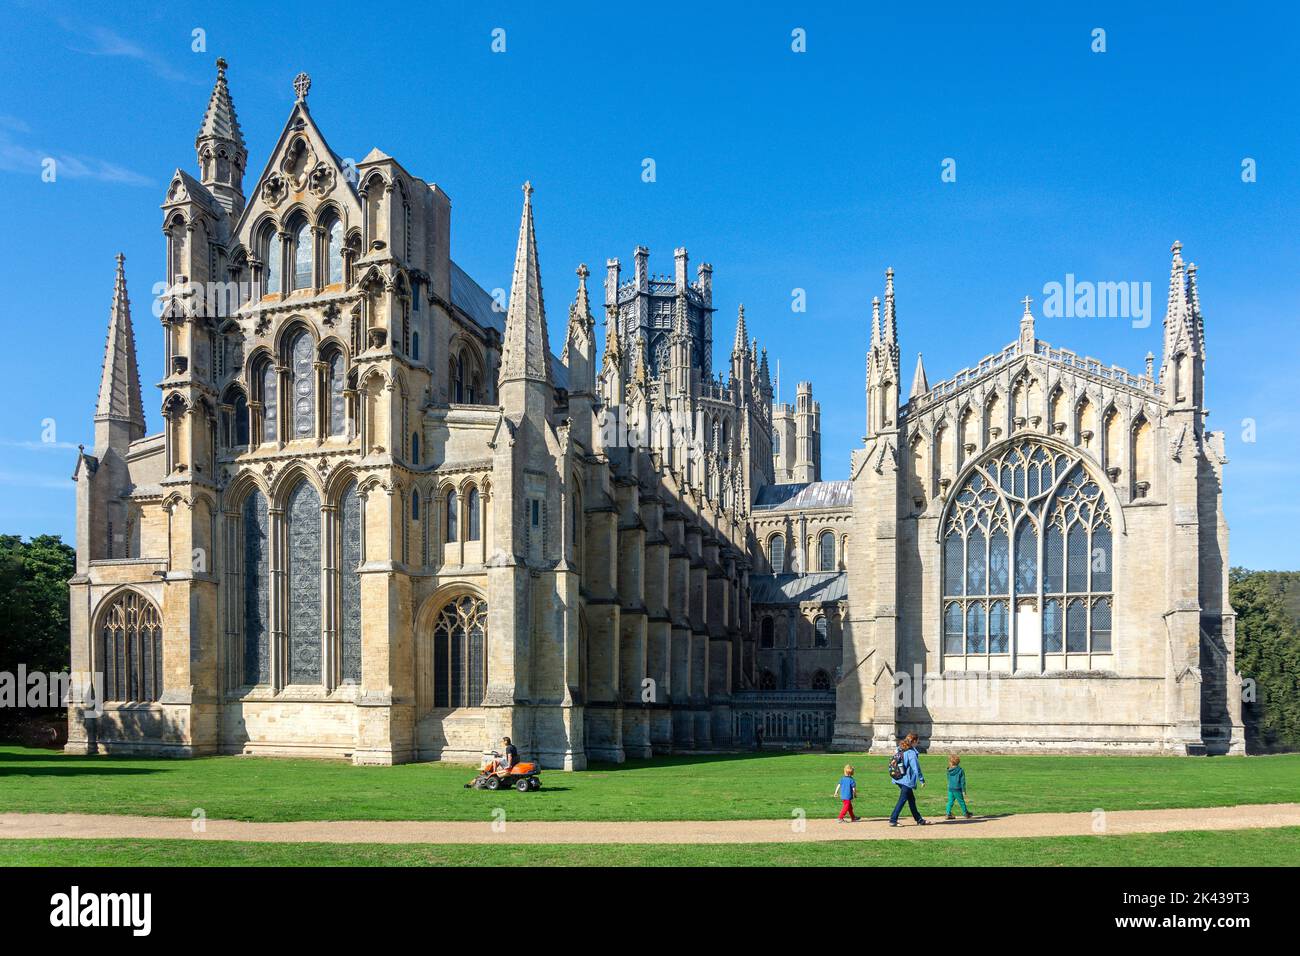 East Presbytery and Octagon Tower of Ely Cathedral, Ely, Cambridgeshire, England, United Kingdom Stock Photo